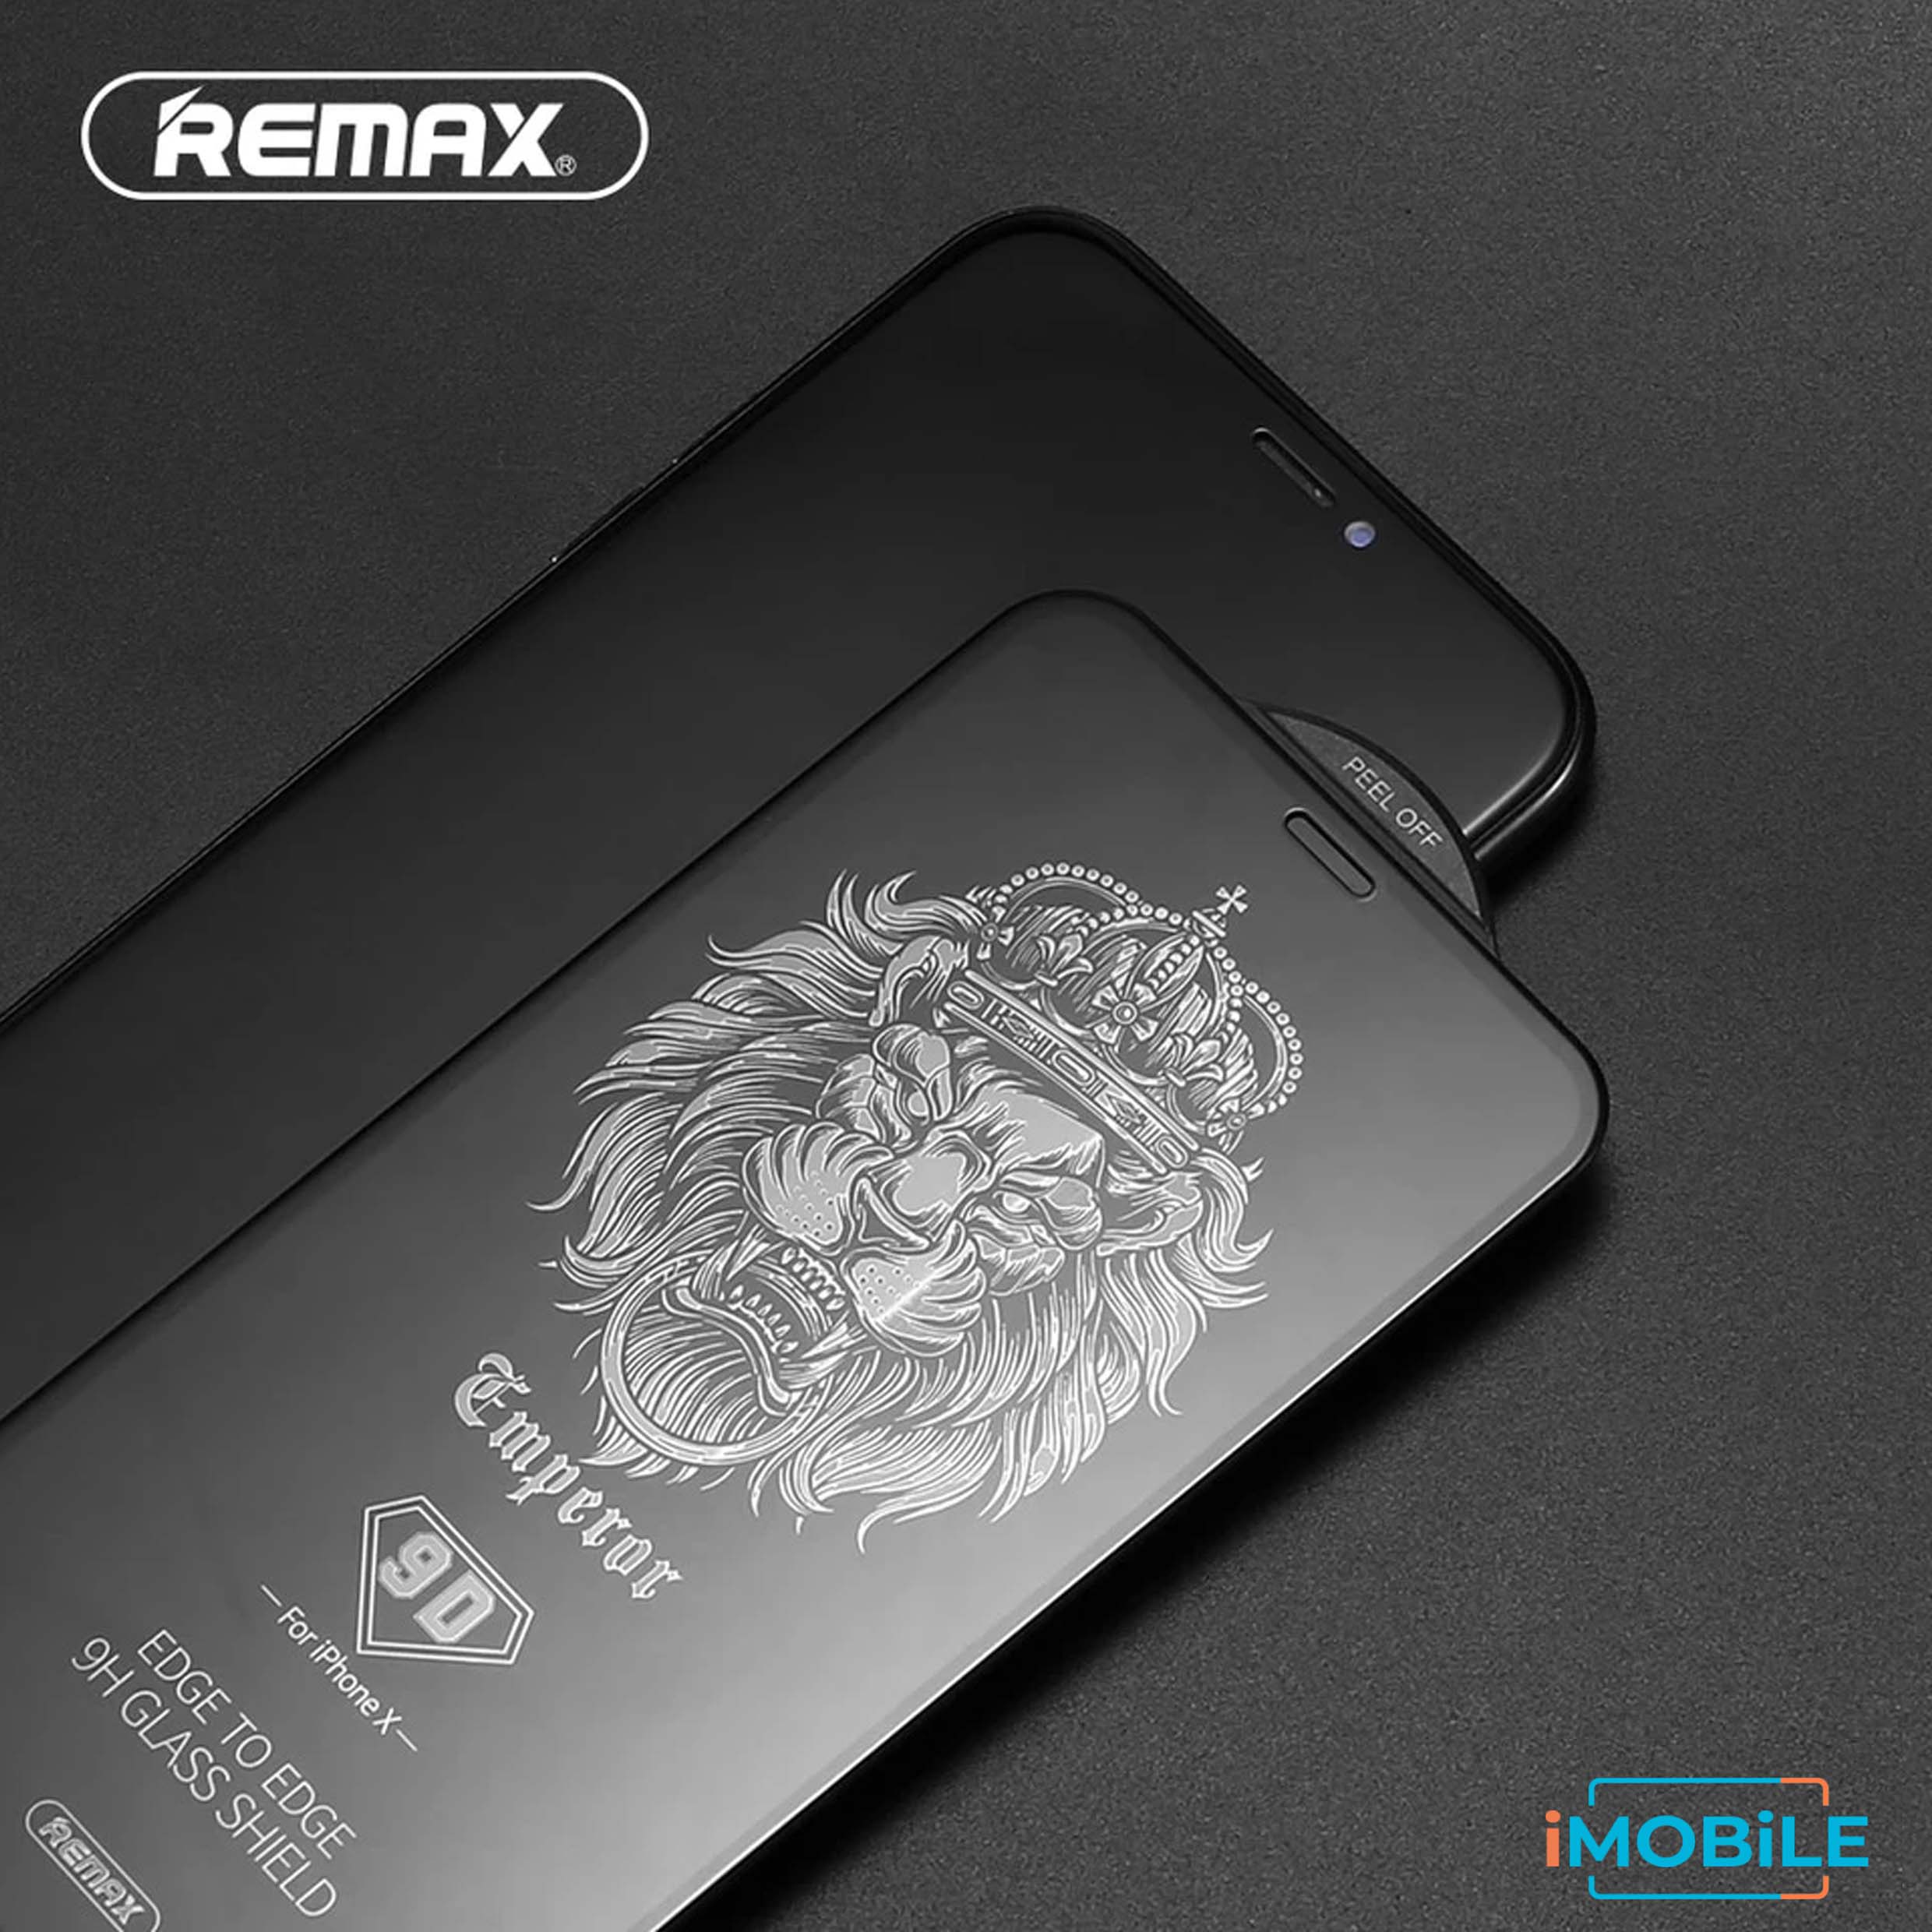 Remax 2.5D Tempered Glass with Envelope Pack, iPhone X/Xs